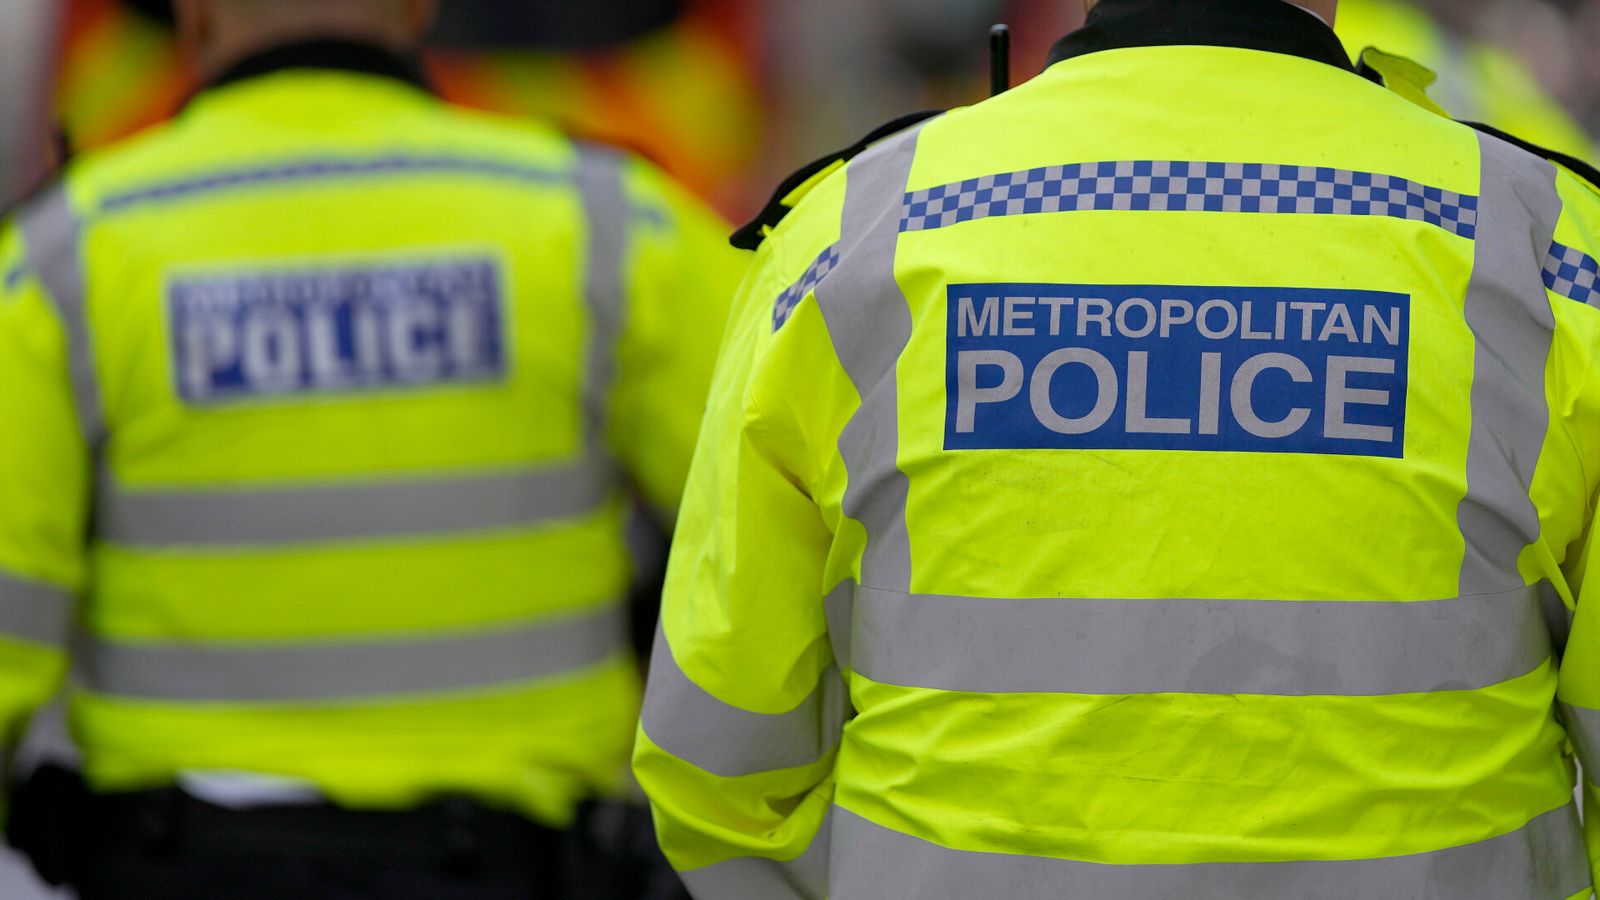 More than 1,000 police officers suspended or on restricted duties, Met reveals